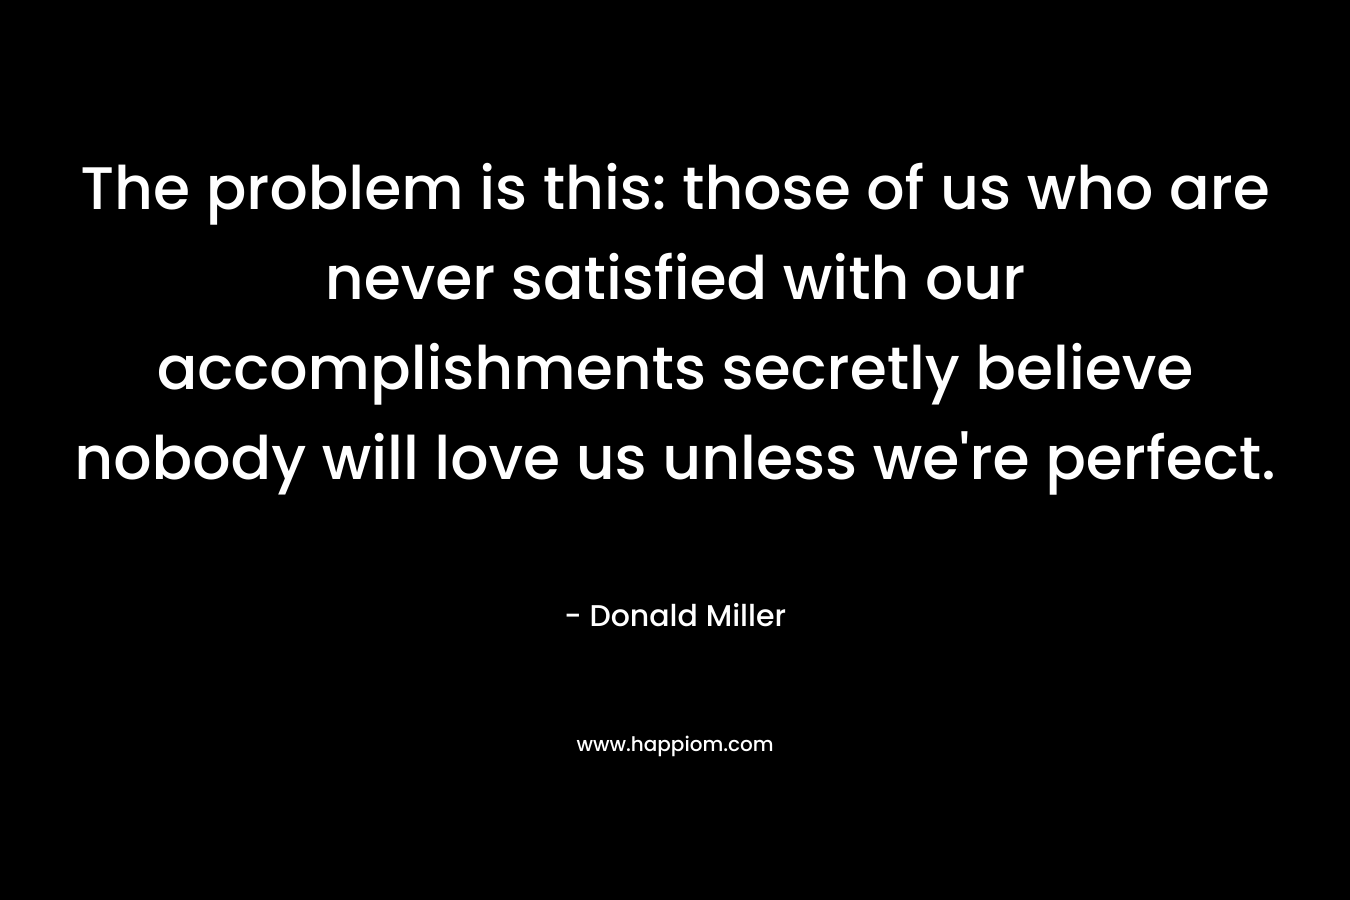 The problem is this: those of us who are never satisfied with our accomplishments secretly believe nobody will love us unless we’re perfect. – Donald Miller